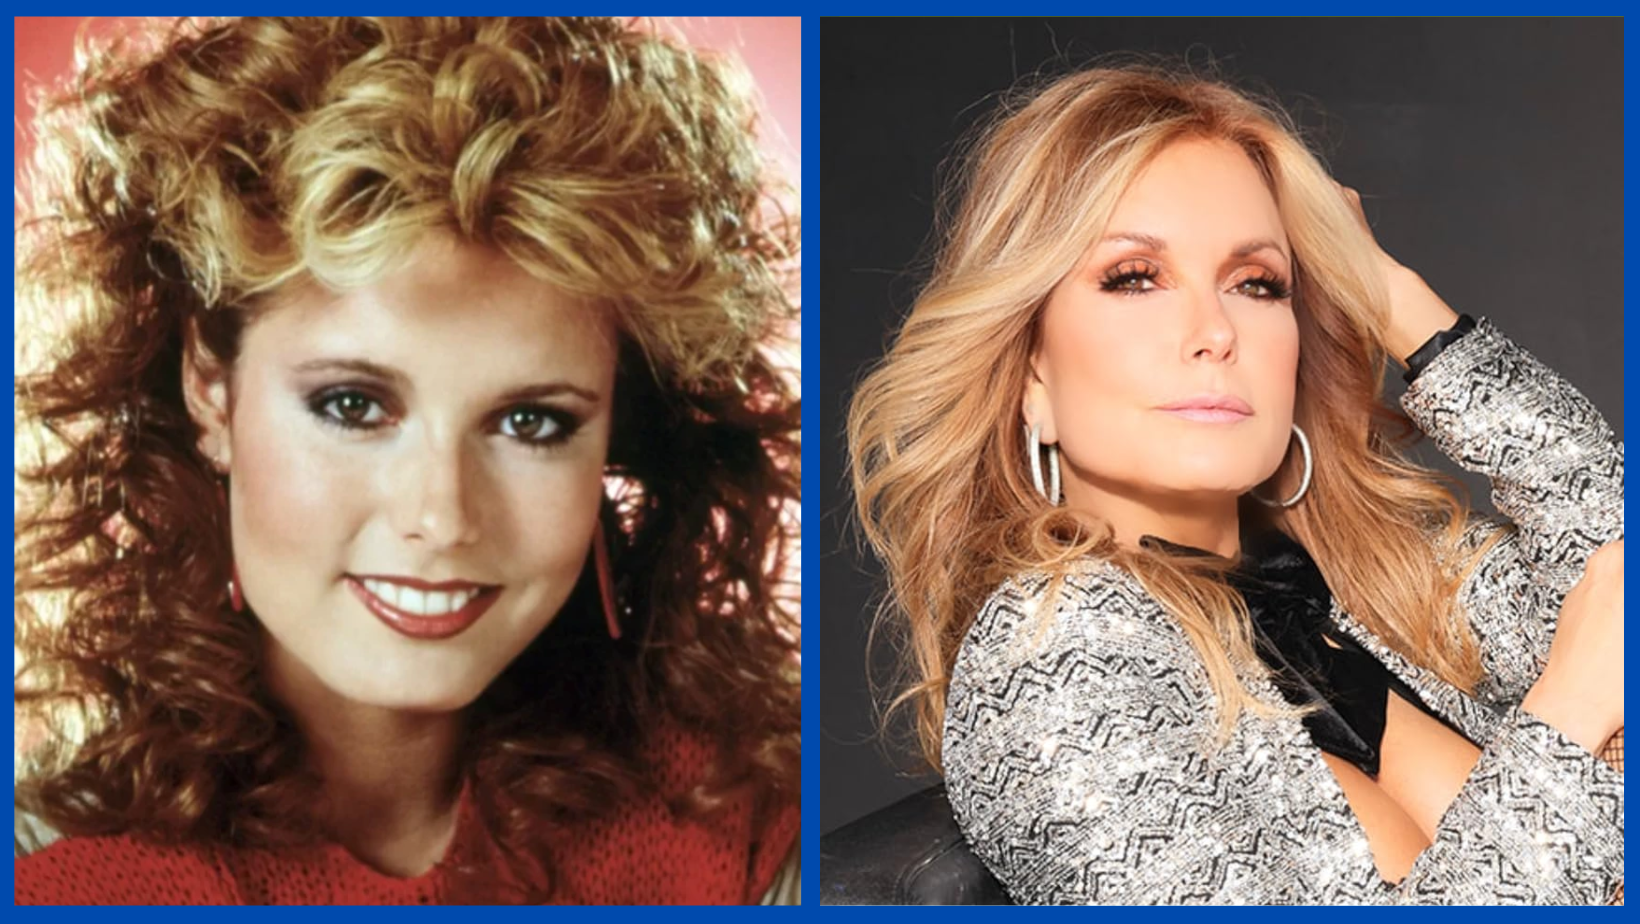 Tracey Bregman Plastic Surgery Before And After: What Happened? Family Explored